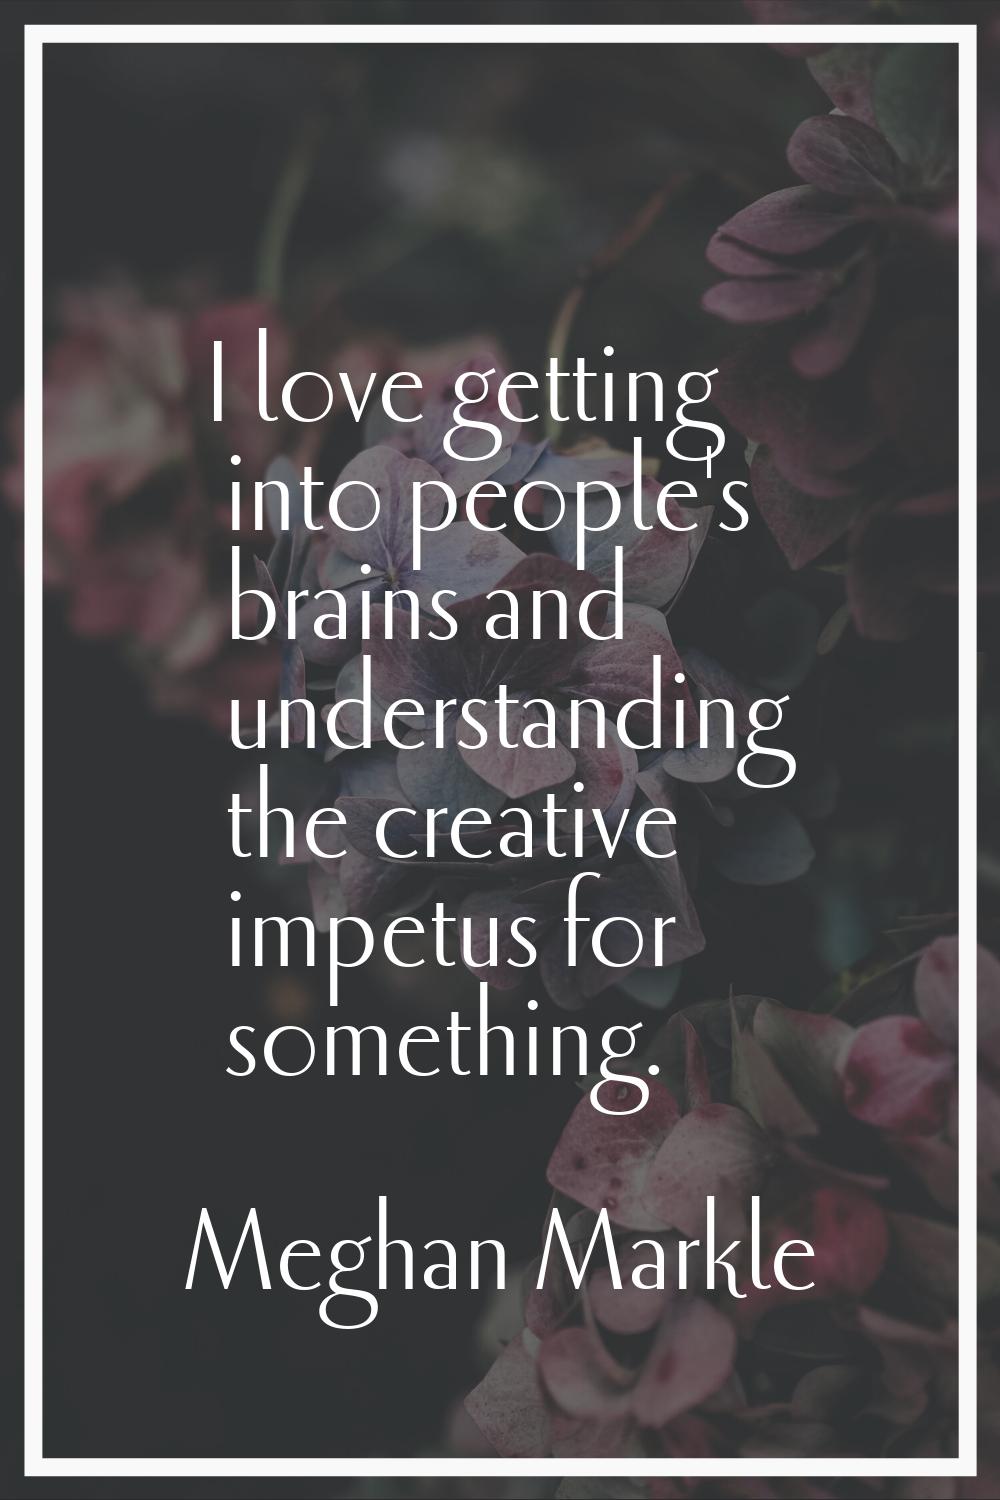 I love getting into people's brains and understanding the creative impetus for something.